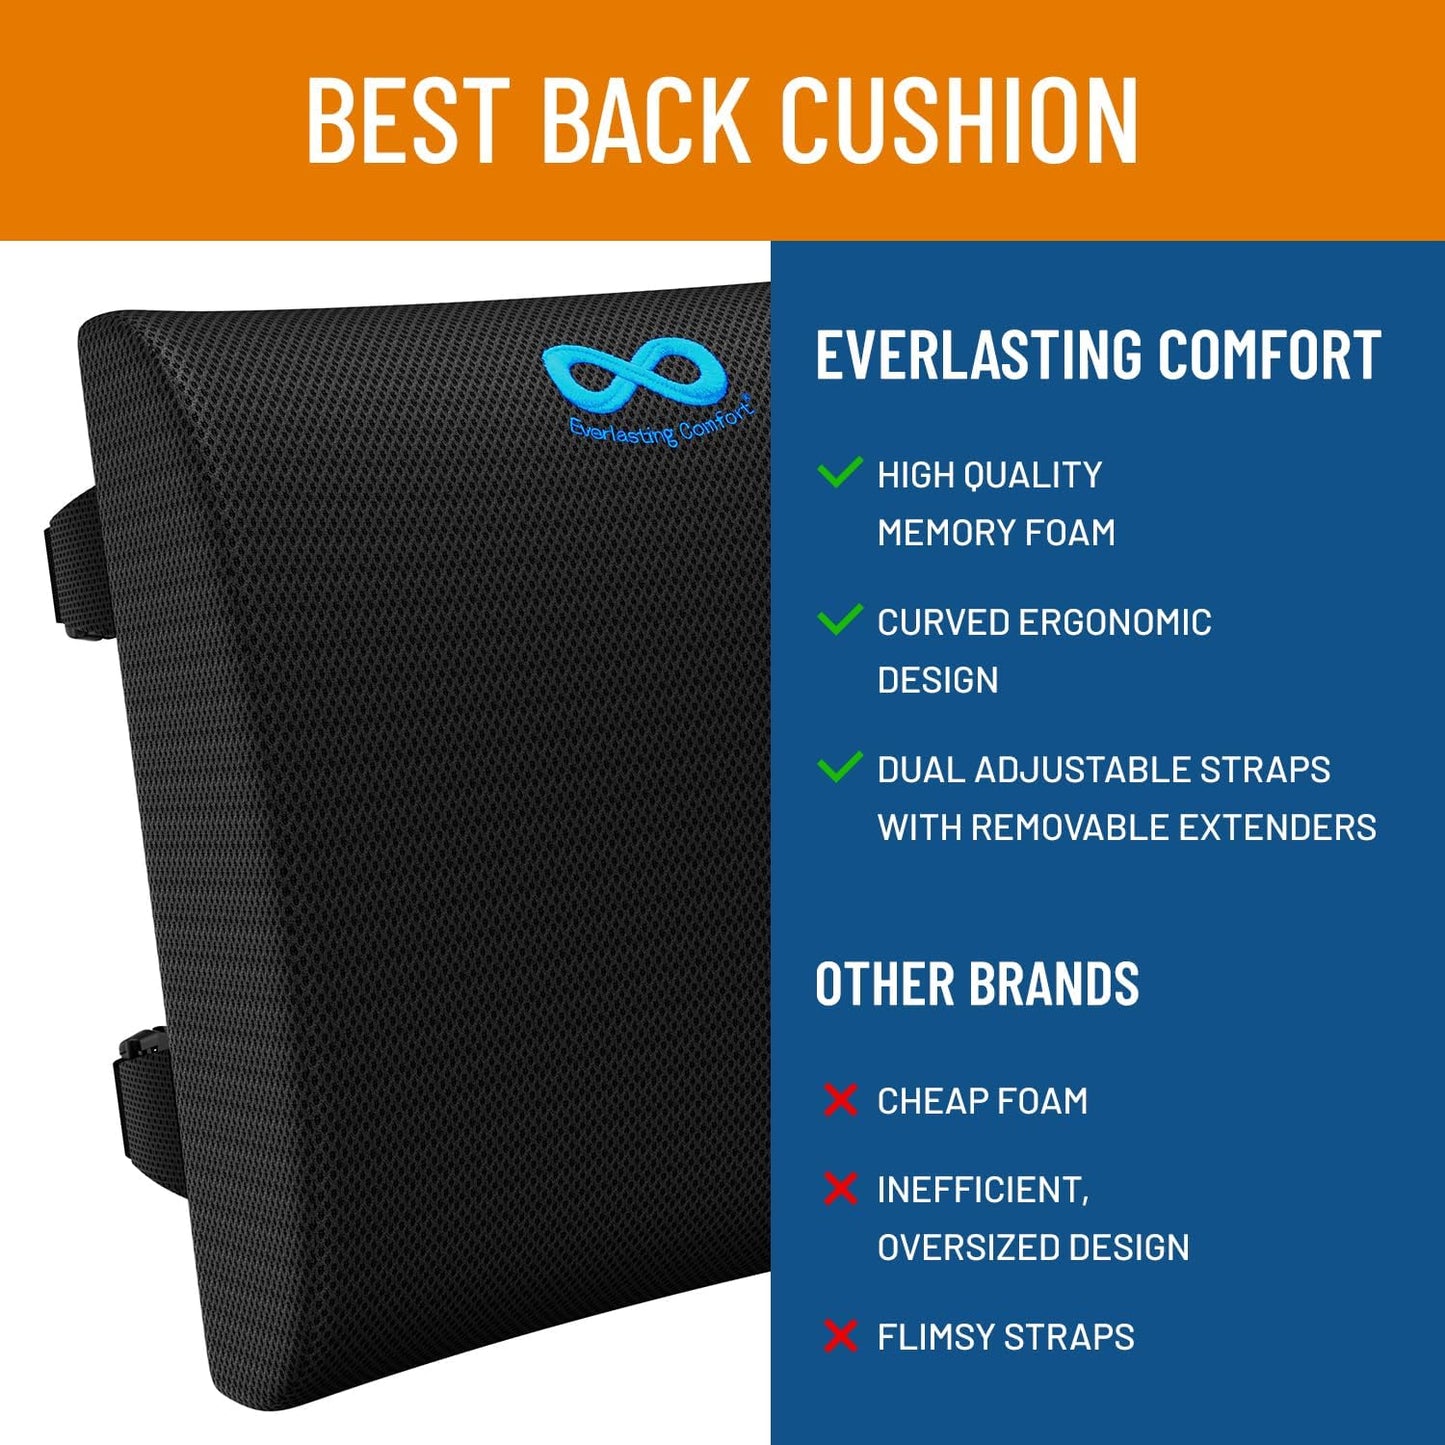 Everlasting Comfort The Original Lumbar Support Pillow - Improves Posture, Promotes Back Pain Relief - Superior Office Chair Back Support for Gaming and Desk Chairs - Lumbar Pillow for Car, Couch